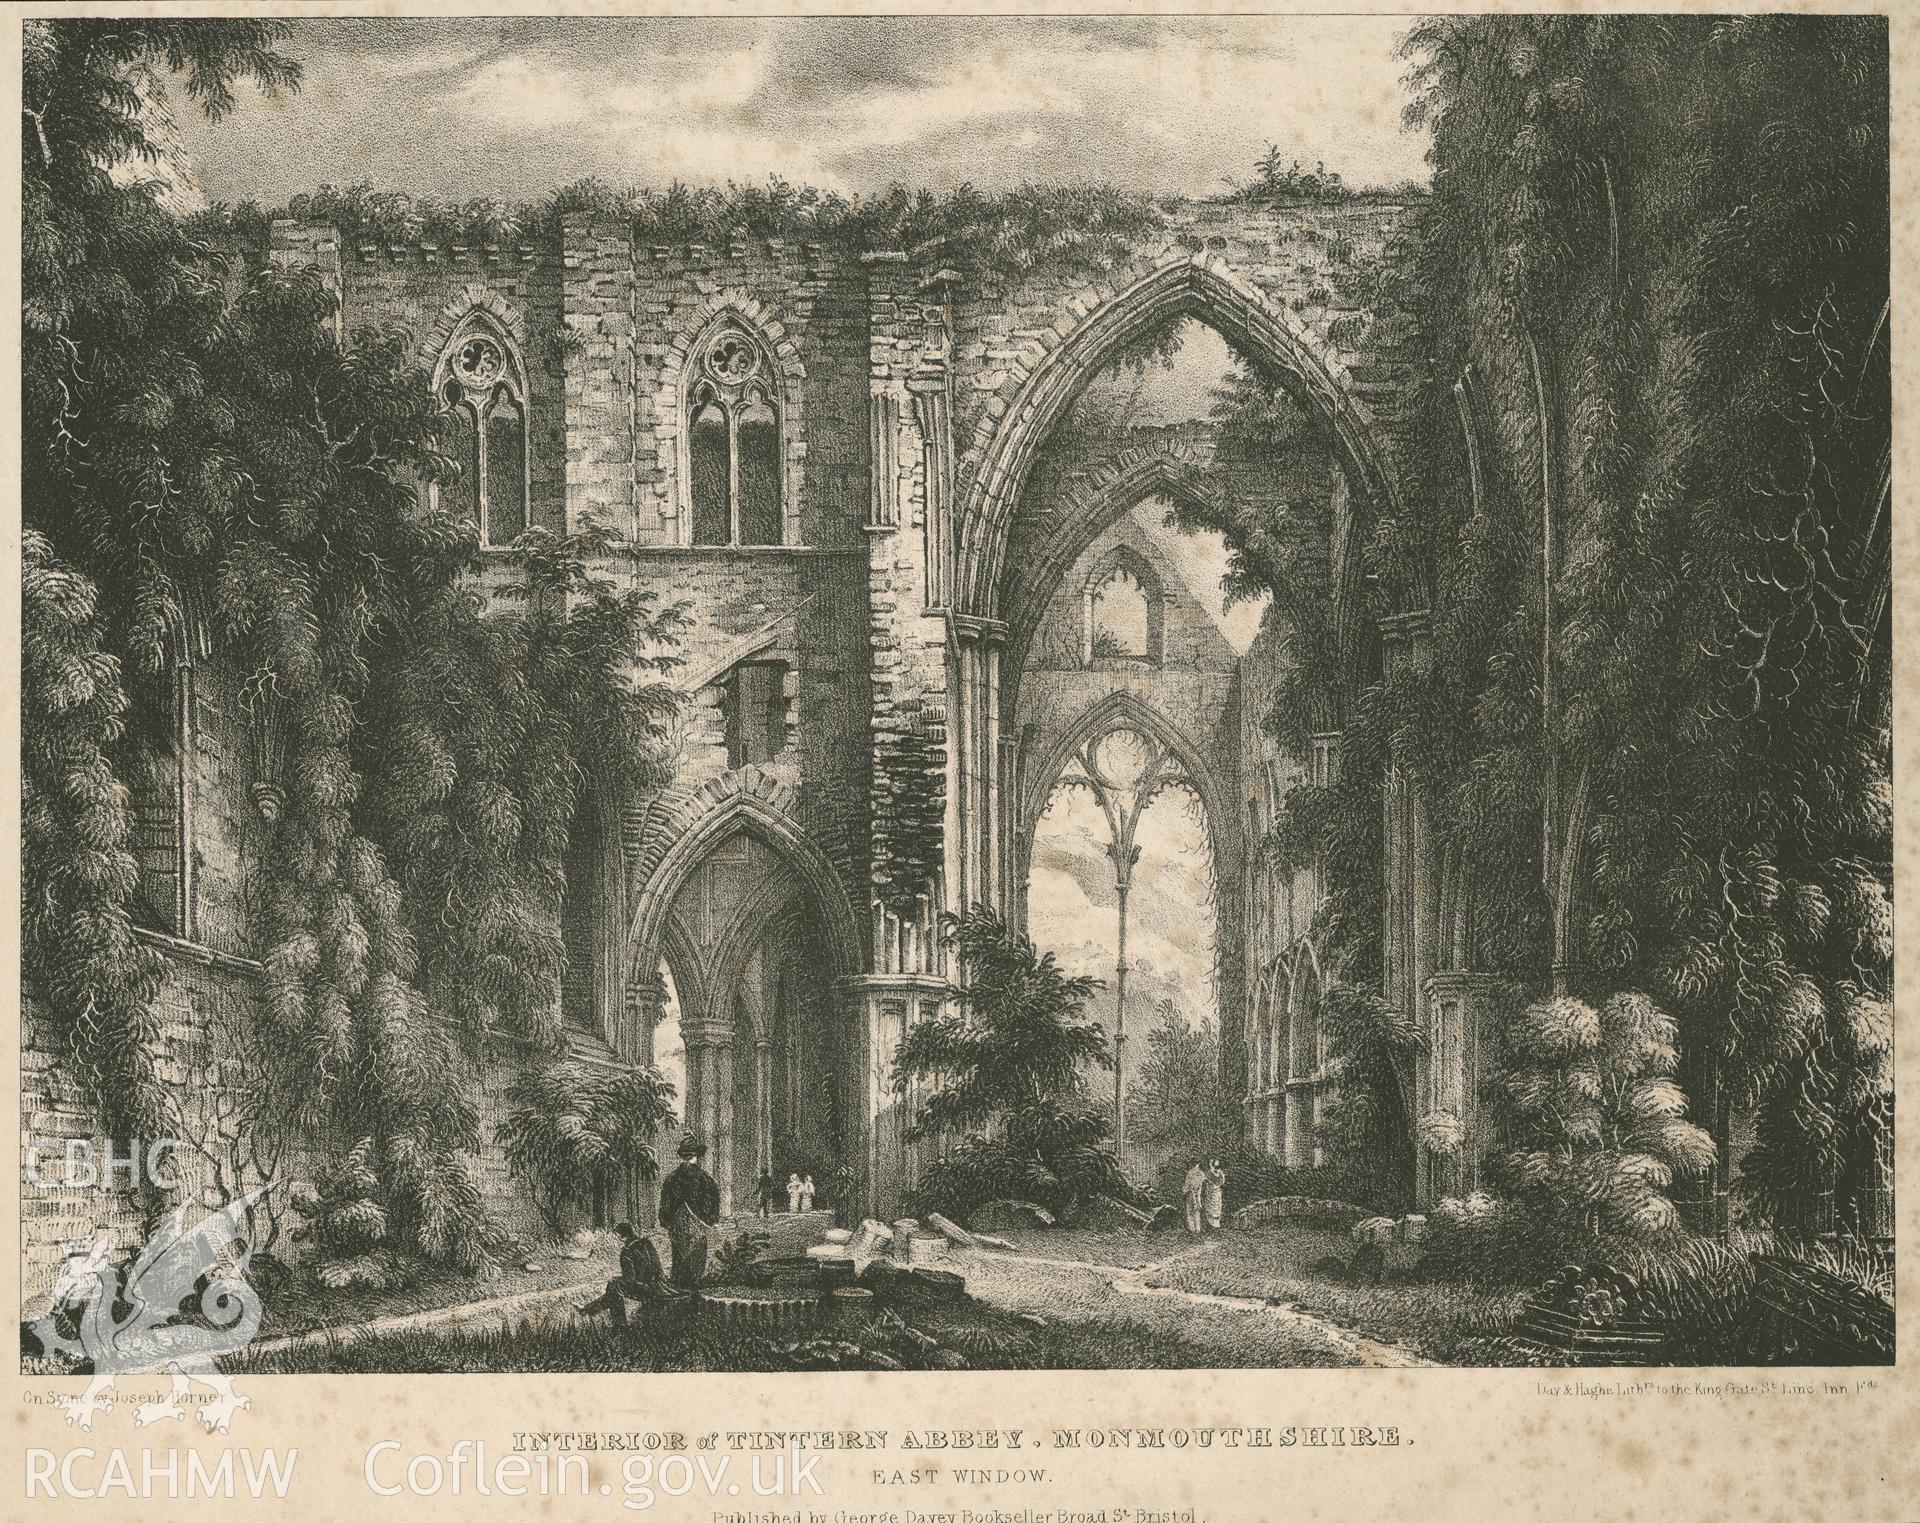 Digital copy of an engraving of view of Tintern Abbey published by George Davey.